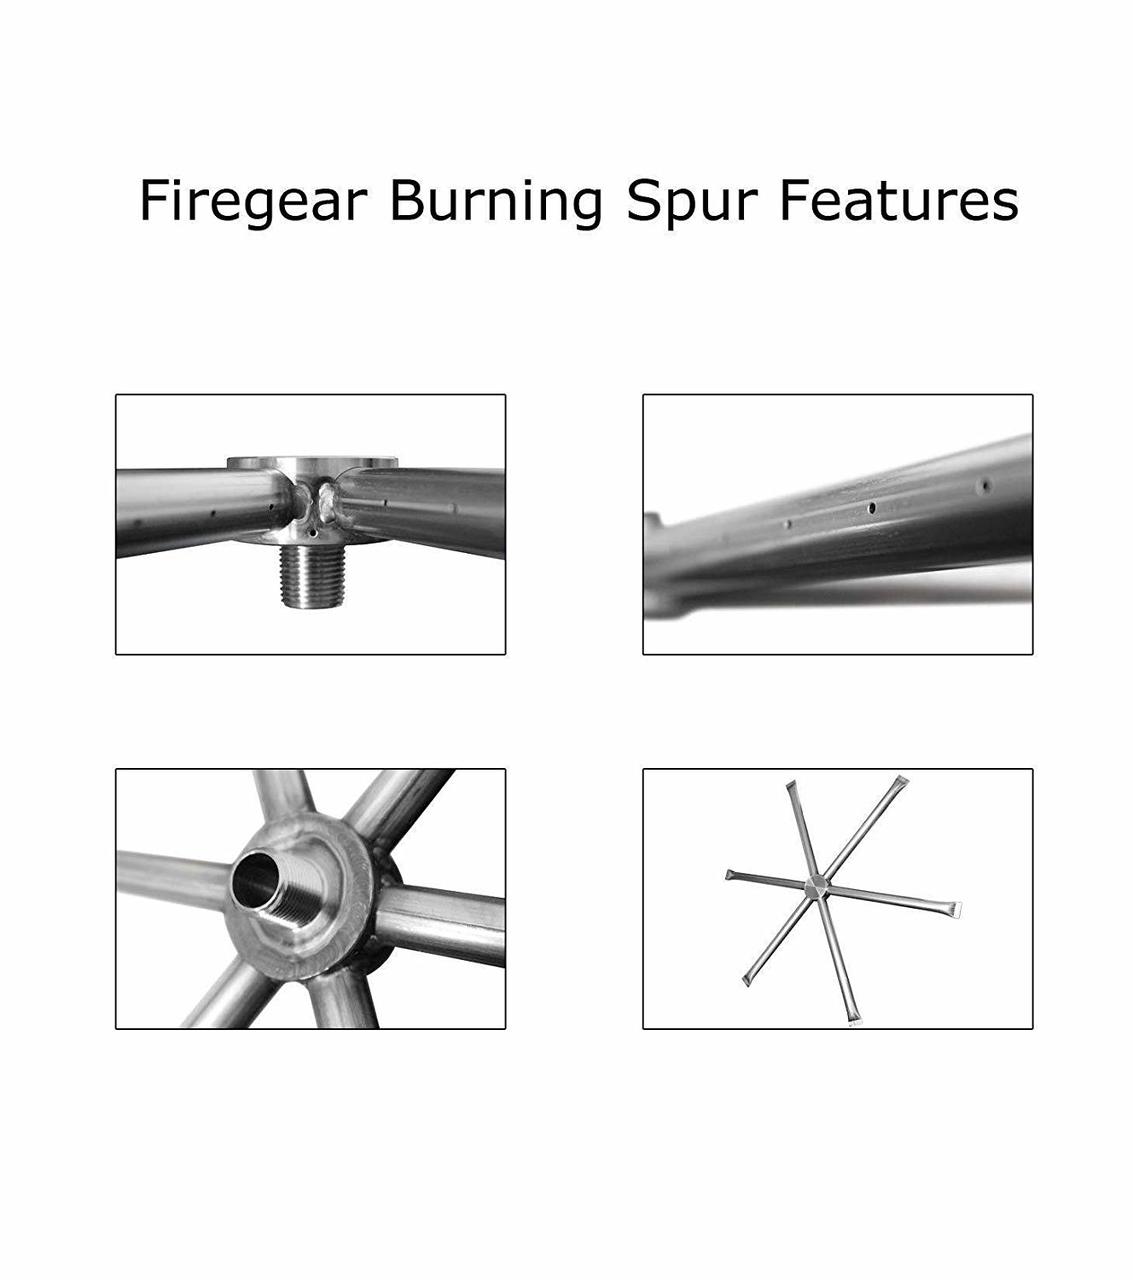 Firegear Stainless Steel Burning Spur for Outdoor Fire-pit